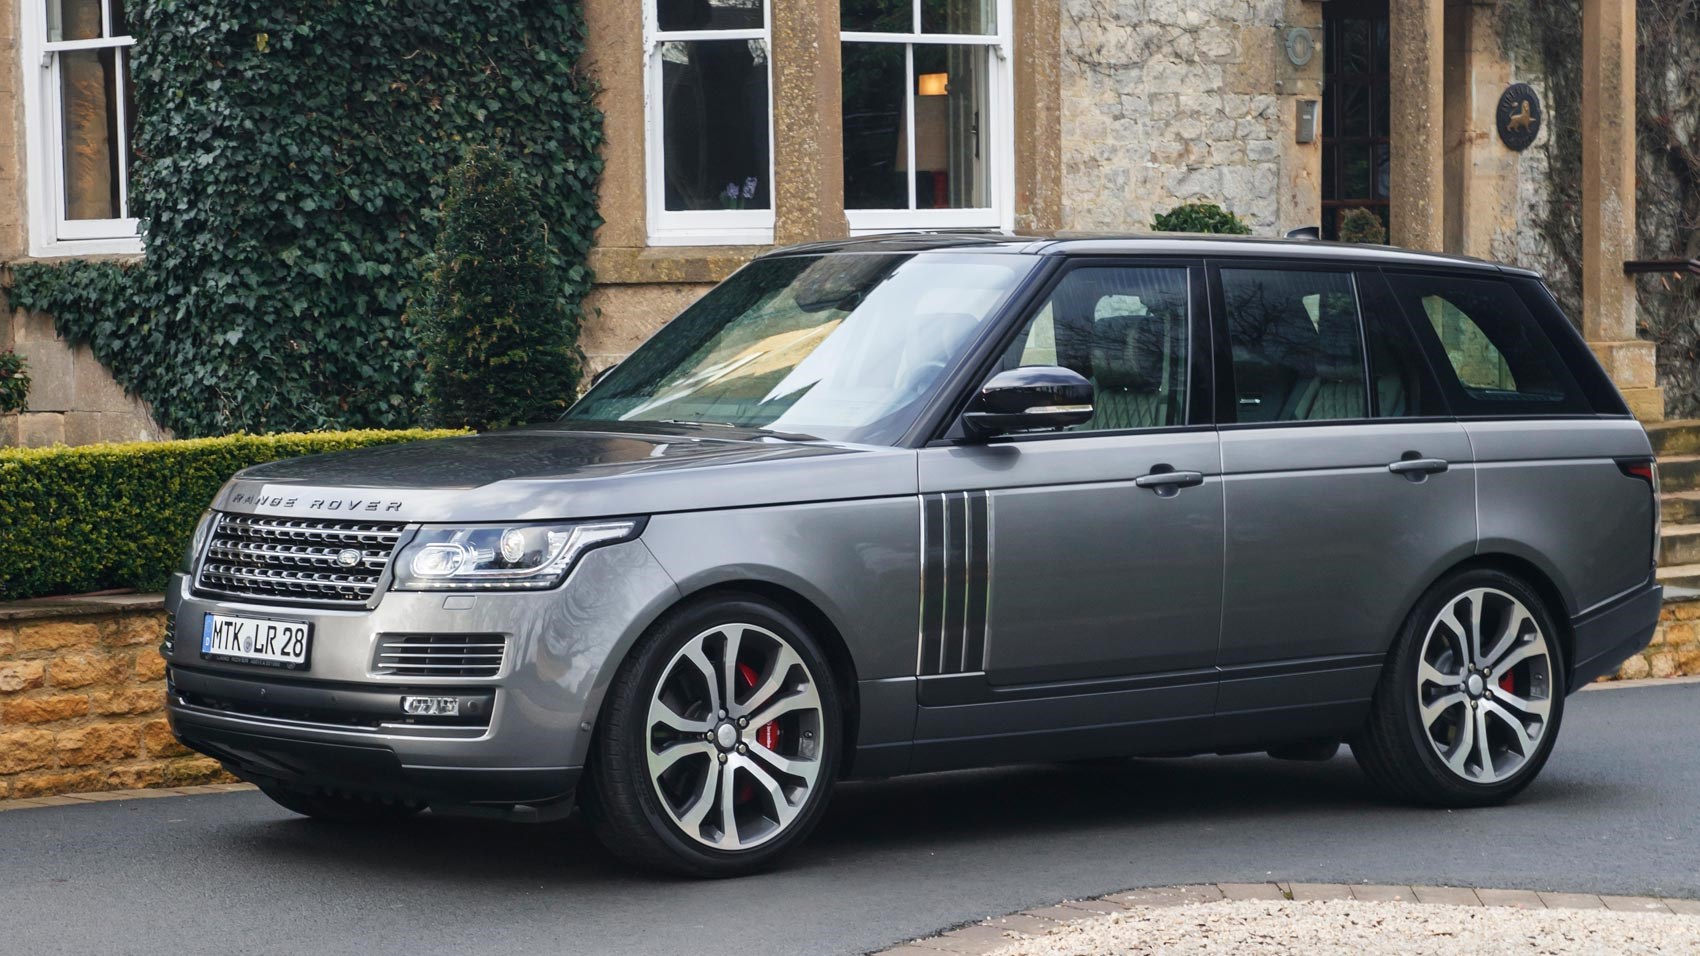 Range Rover Sv Autobiography 2020 Review  - Our Most Agile And Dynamically Capable Range Rover Yet, The Svautobiography Dynamic Has A Powerful V8 Engine At Its Heart, Producing A Mighty 557 Hp.